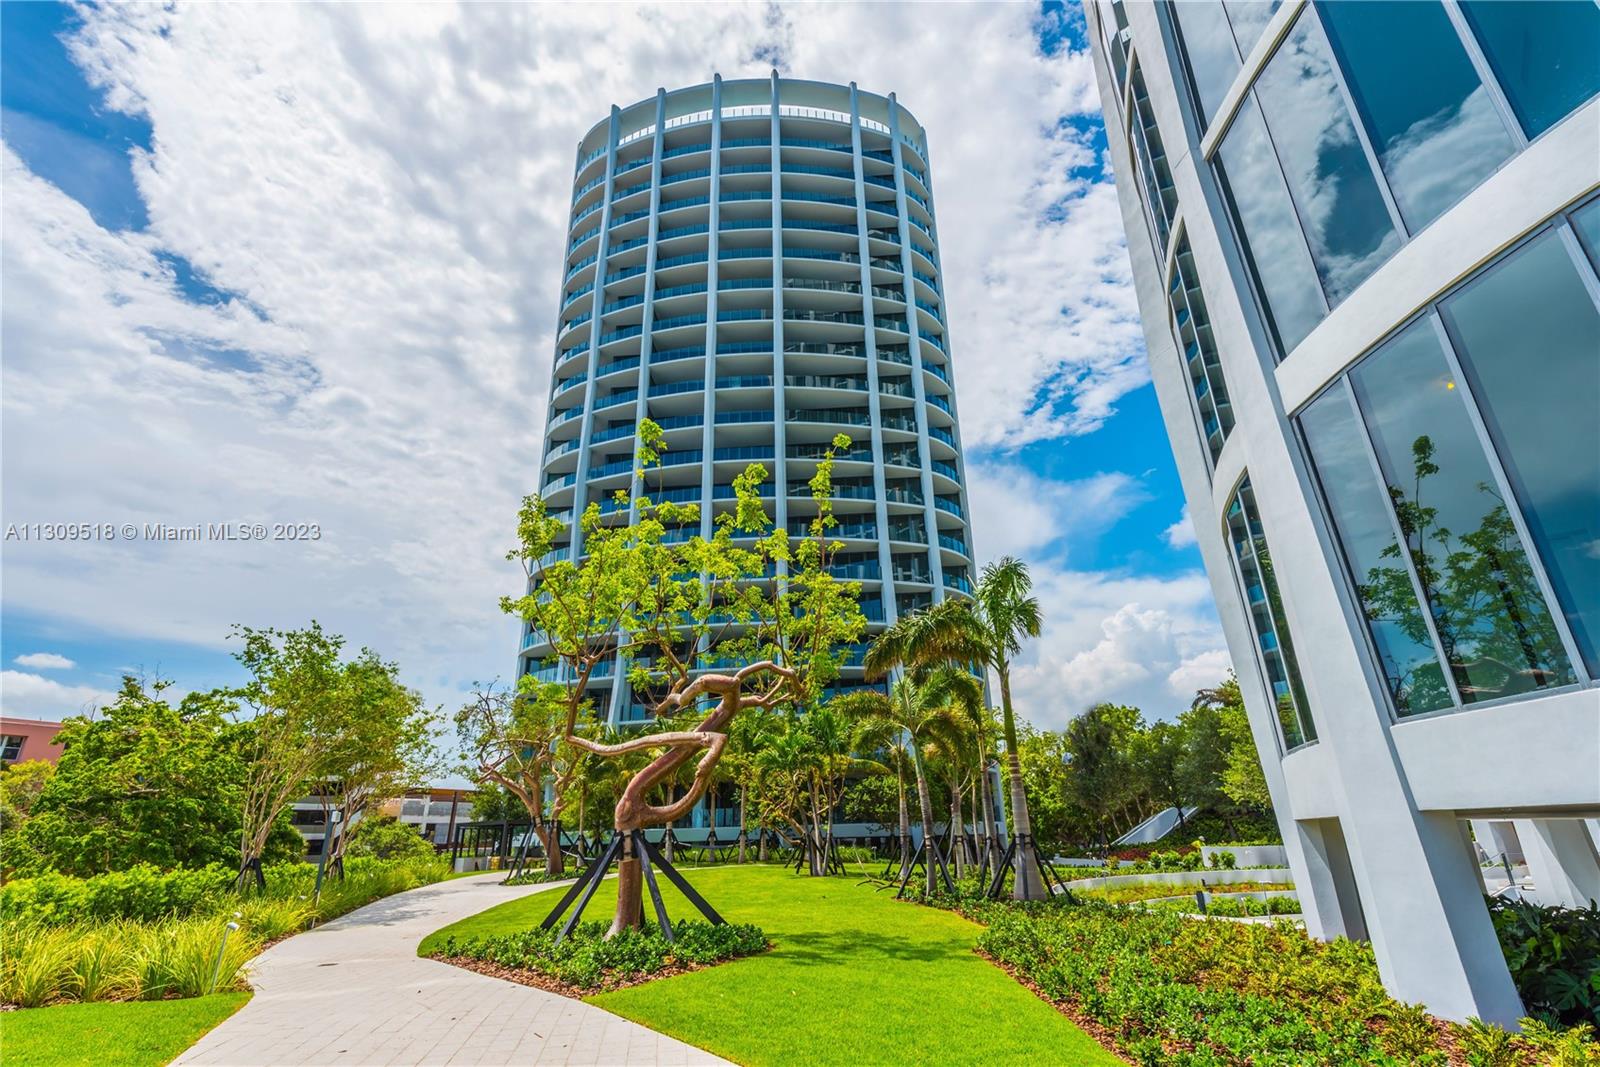 Live in luxurious splendor & most exclusive waterfront development. Located in coveted Coconut Grove facing Biscayne Bay & the marinas, this 3 bedroom and 2.5 bath unit features 10 ft. high ceilings, overlooking the bay. Unit has one of the largest private terraces in the building, spectacular kitchen with Wolf and Subzero appliances, marble counters, and custom built in closets in all bedrooms. Custom electrical blackouts in all bedrooms. 1 assigned parking. Master bedroom has double shower & vanities. 
The Club Residences Tower has its own rooftop pool. Building with the most spectacular amenities in the entire coconut grove. 550 feet of pools, unparalleled landscaping, amazing gym, spa, private restaurant, concierge, valet and more. 
Walk distance to everything in the Grove!